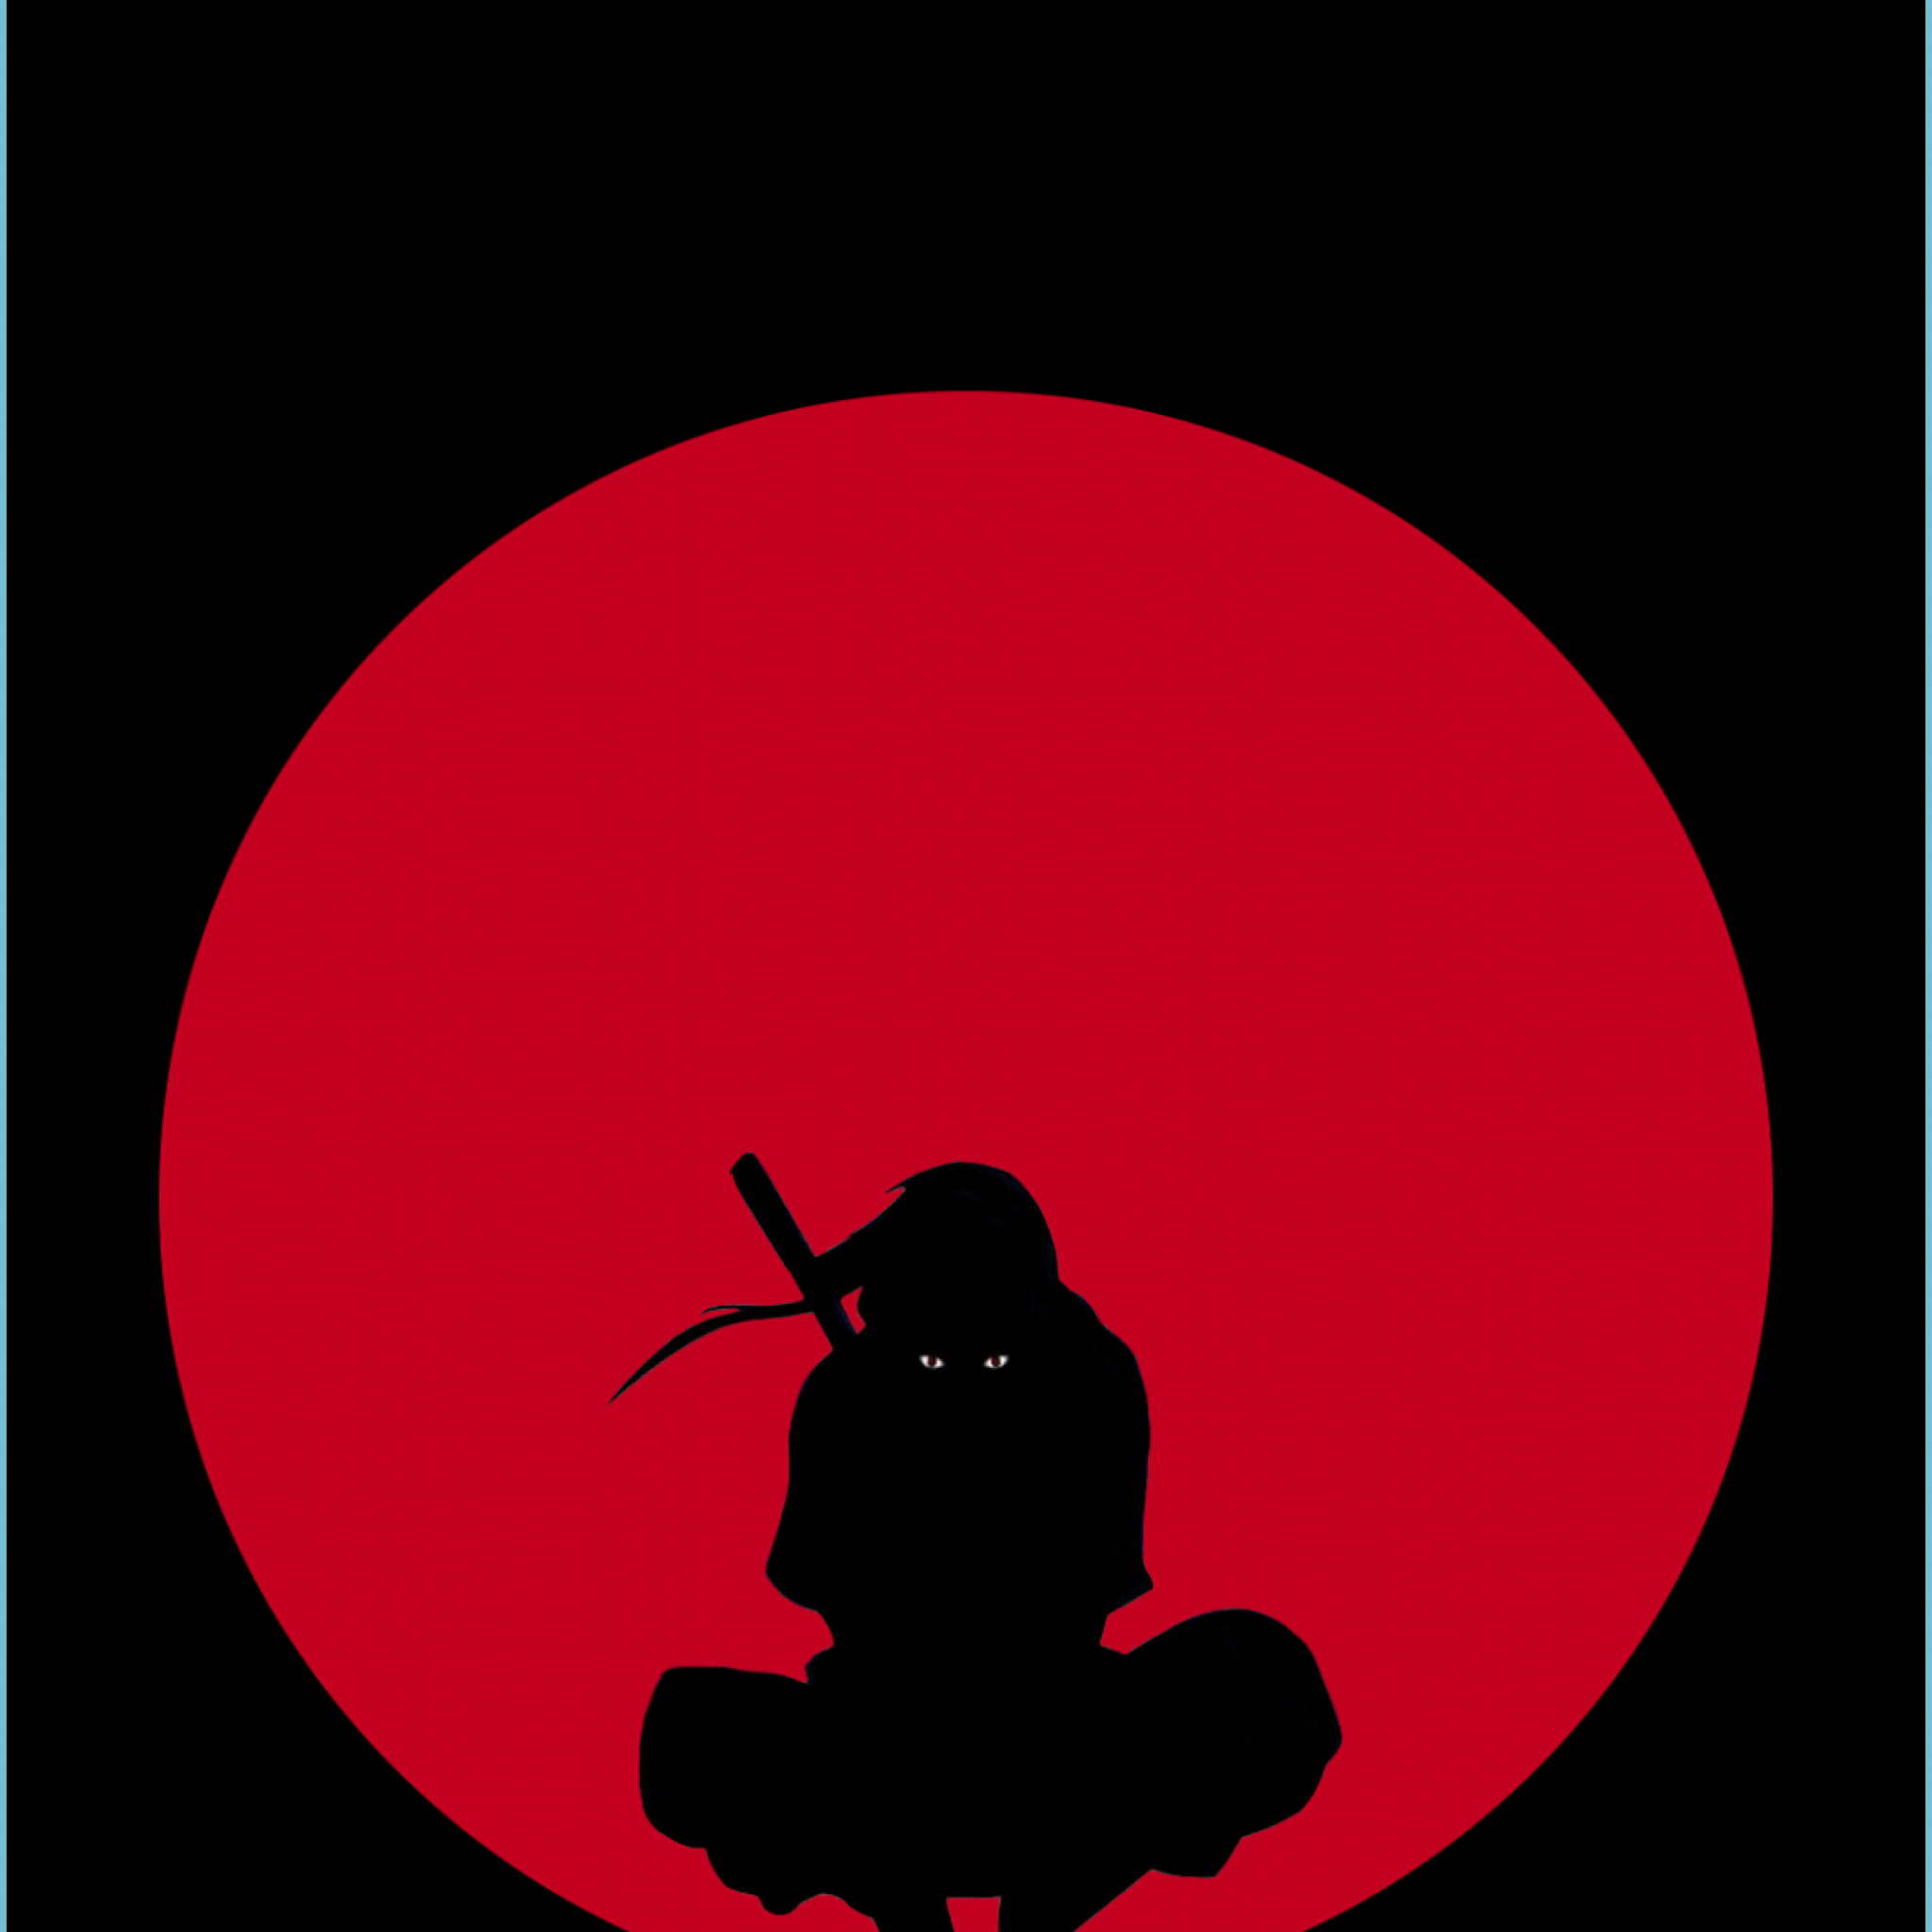 Since there were no good Itachi amoled wallpaper, I made one on